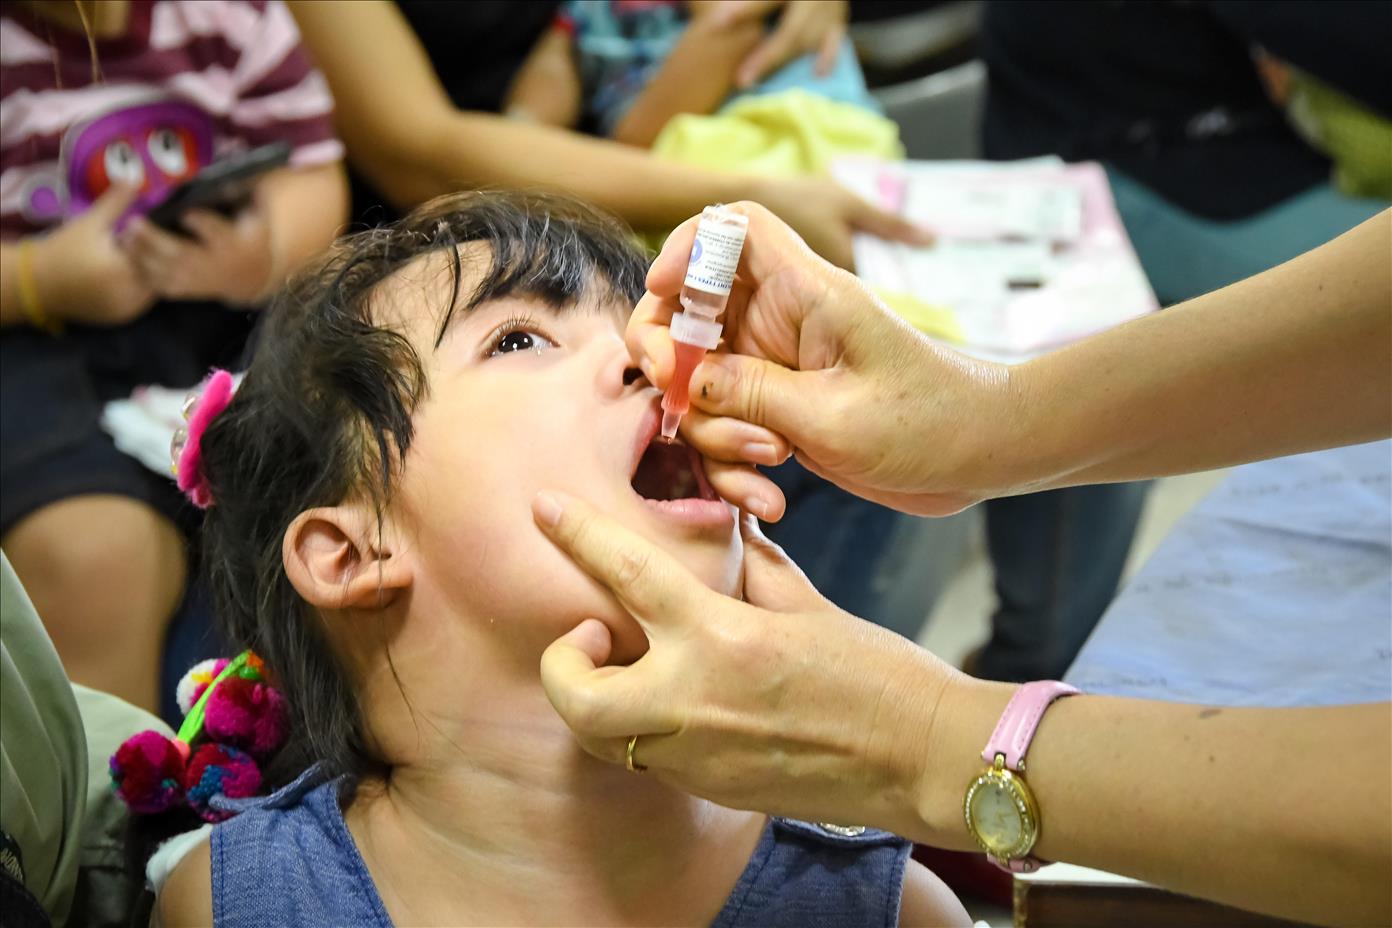 Polio: We're Developing A Safer Vaccine That Use No Genetic Material From The Virus